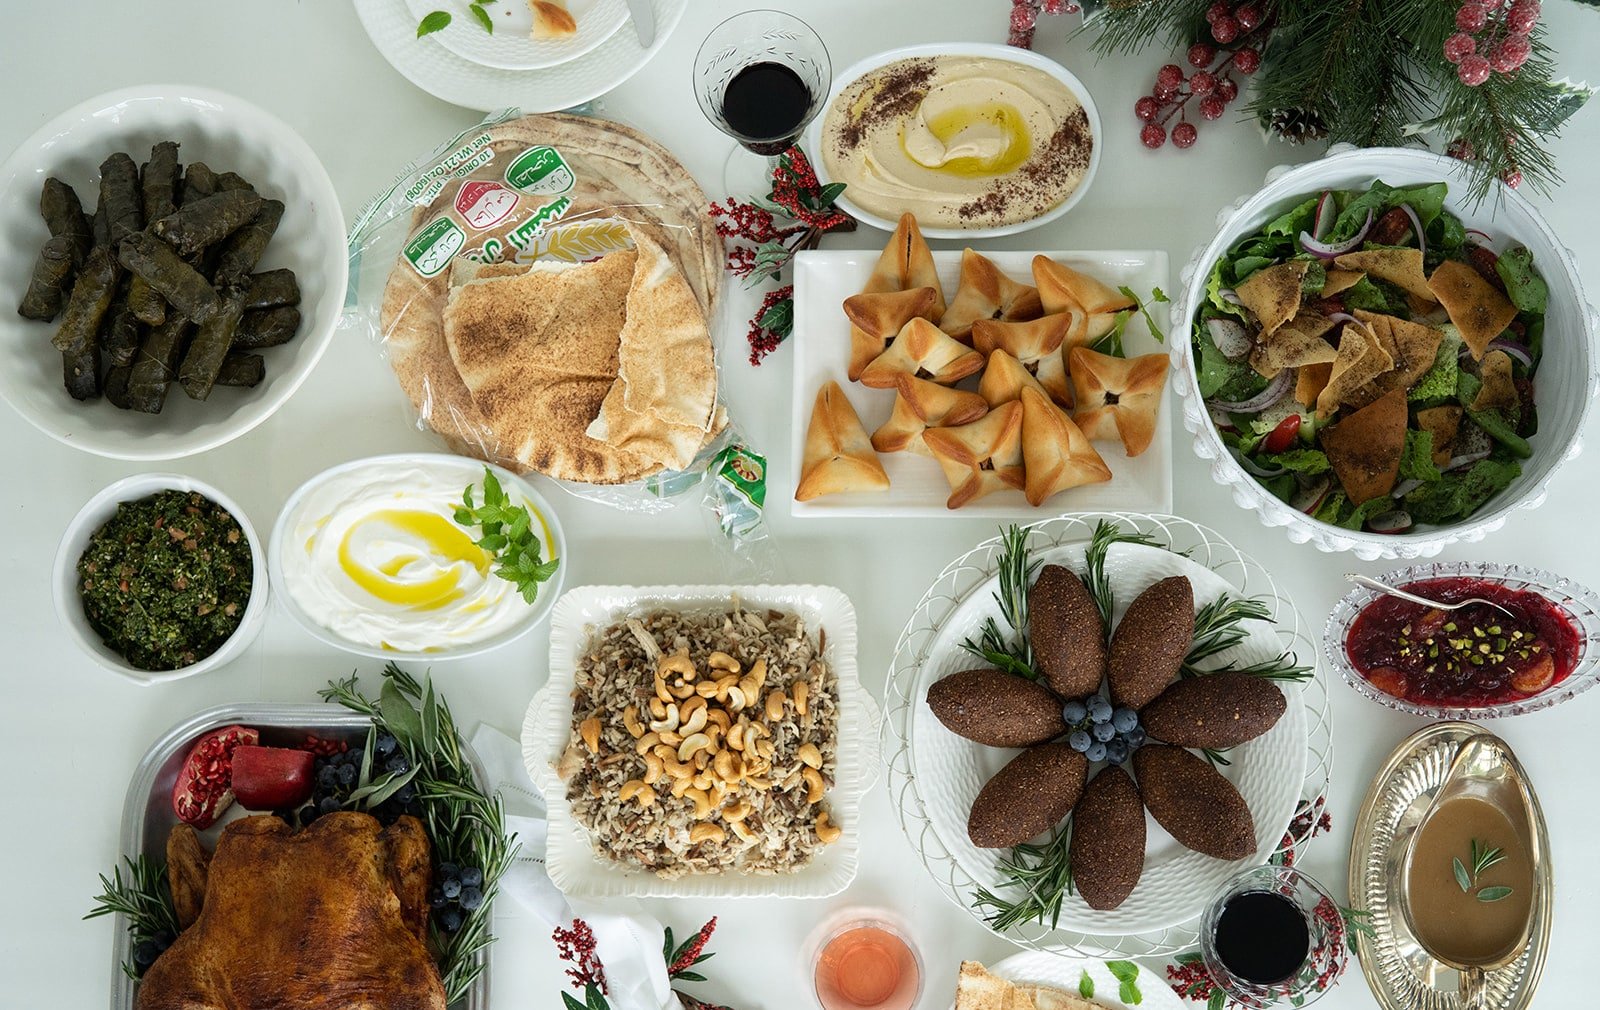 Lebanese recipes in dishes on the table